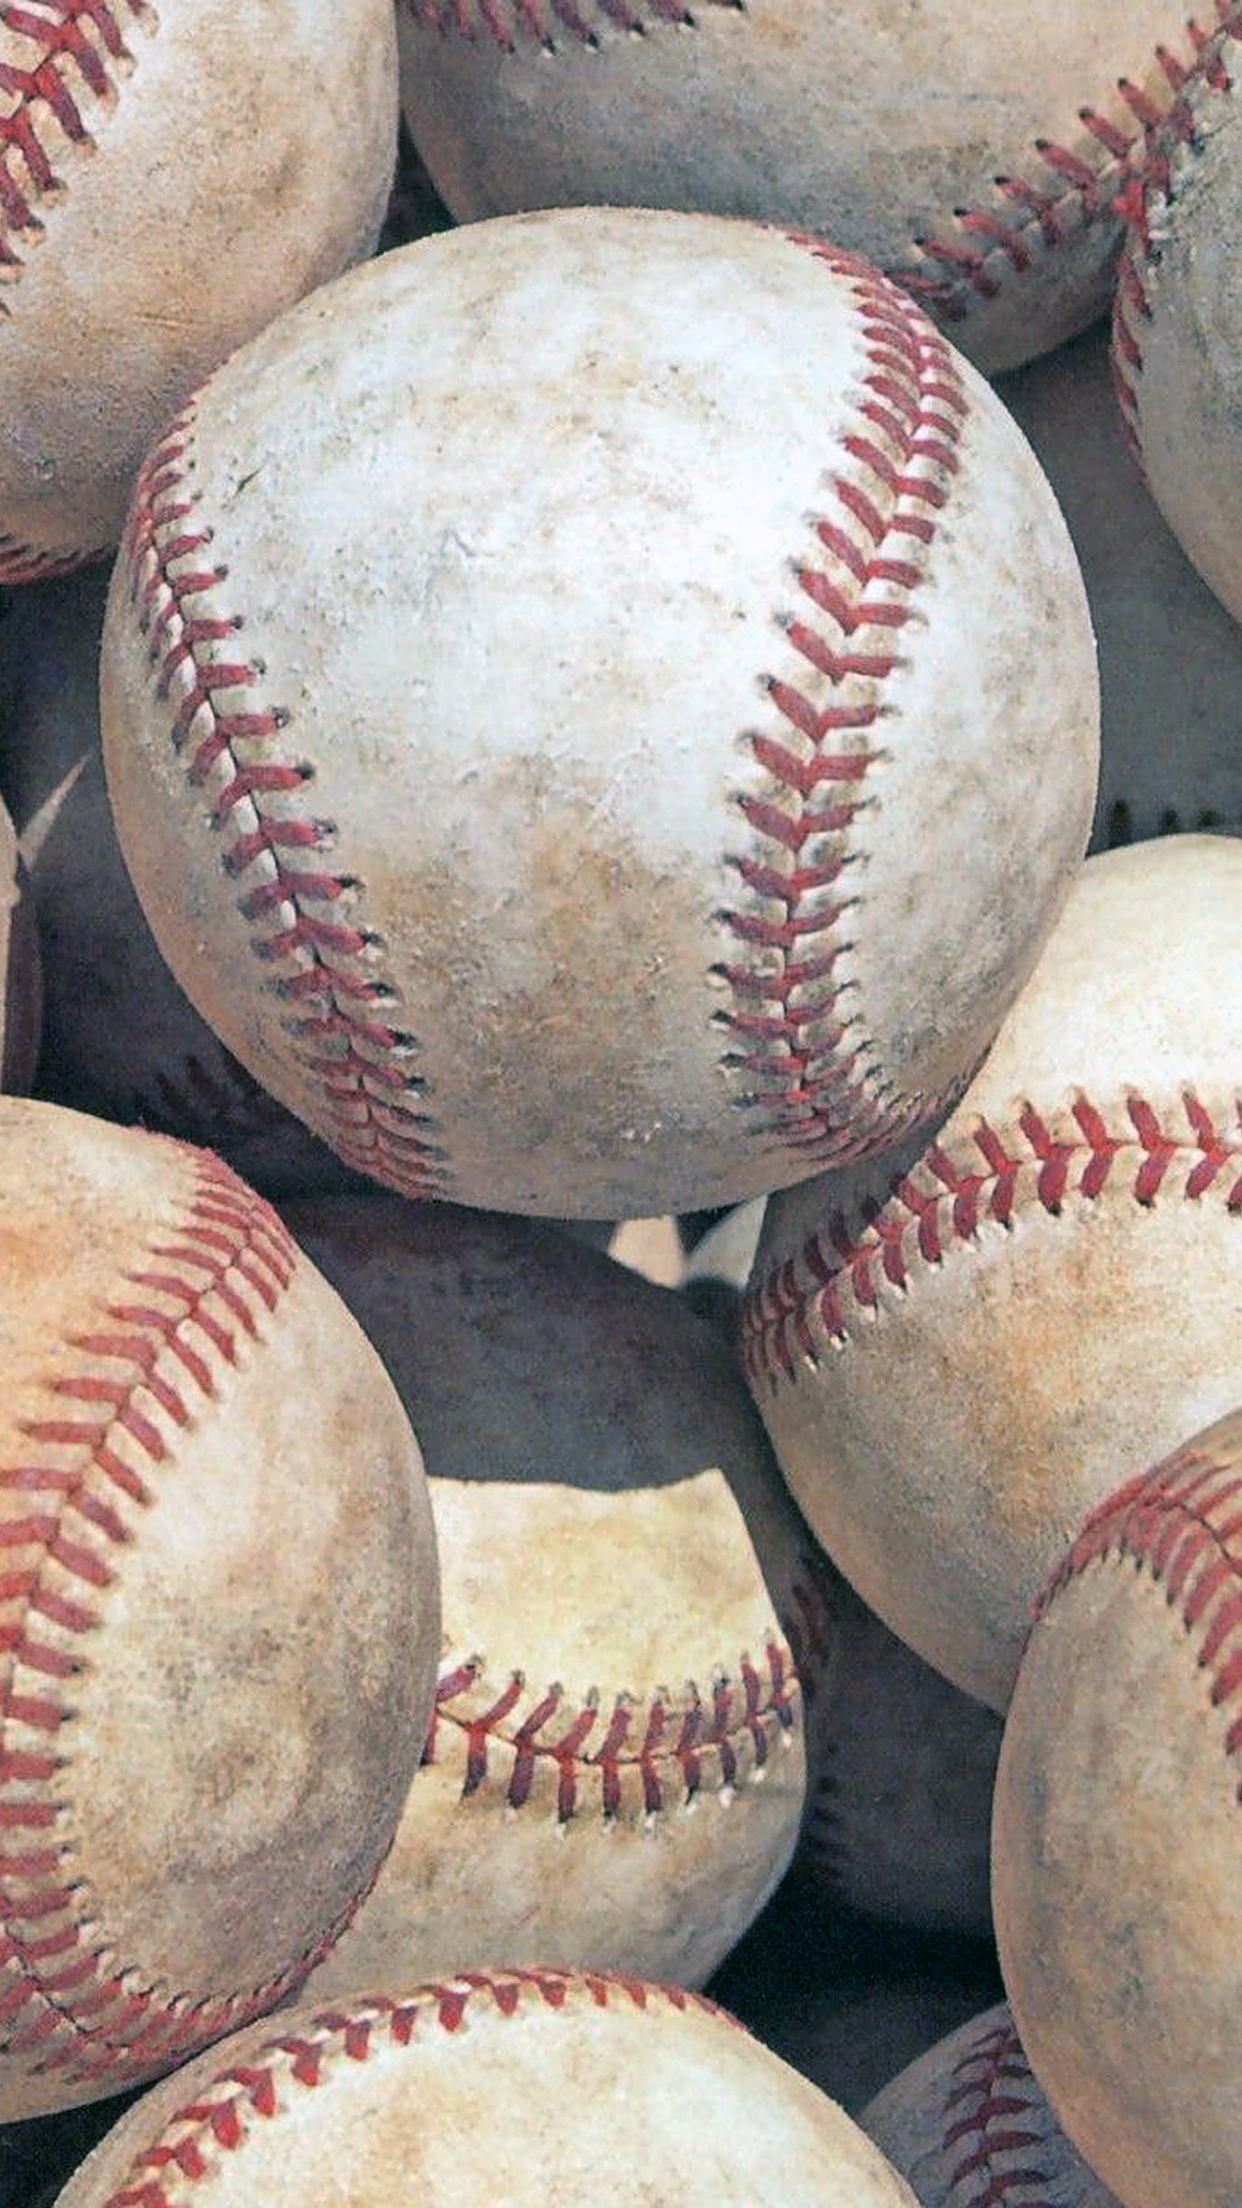 Baseball Wallpaper for iPhone Pro Max, X, 6